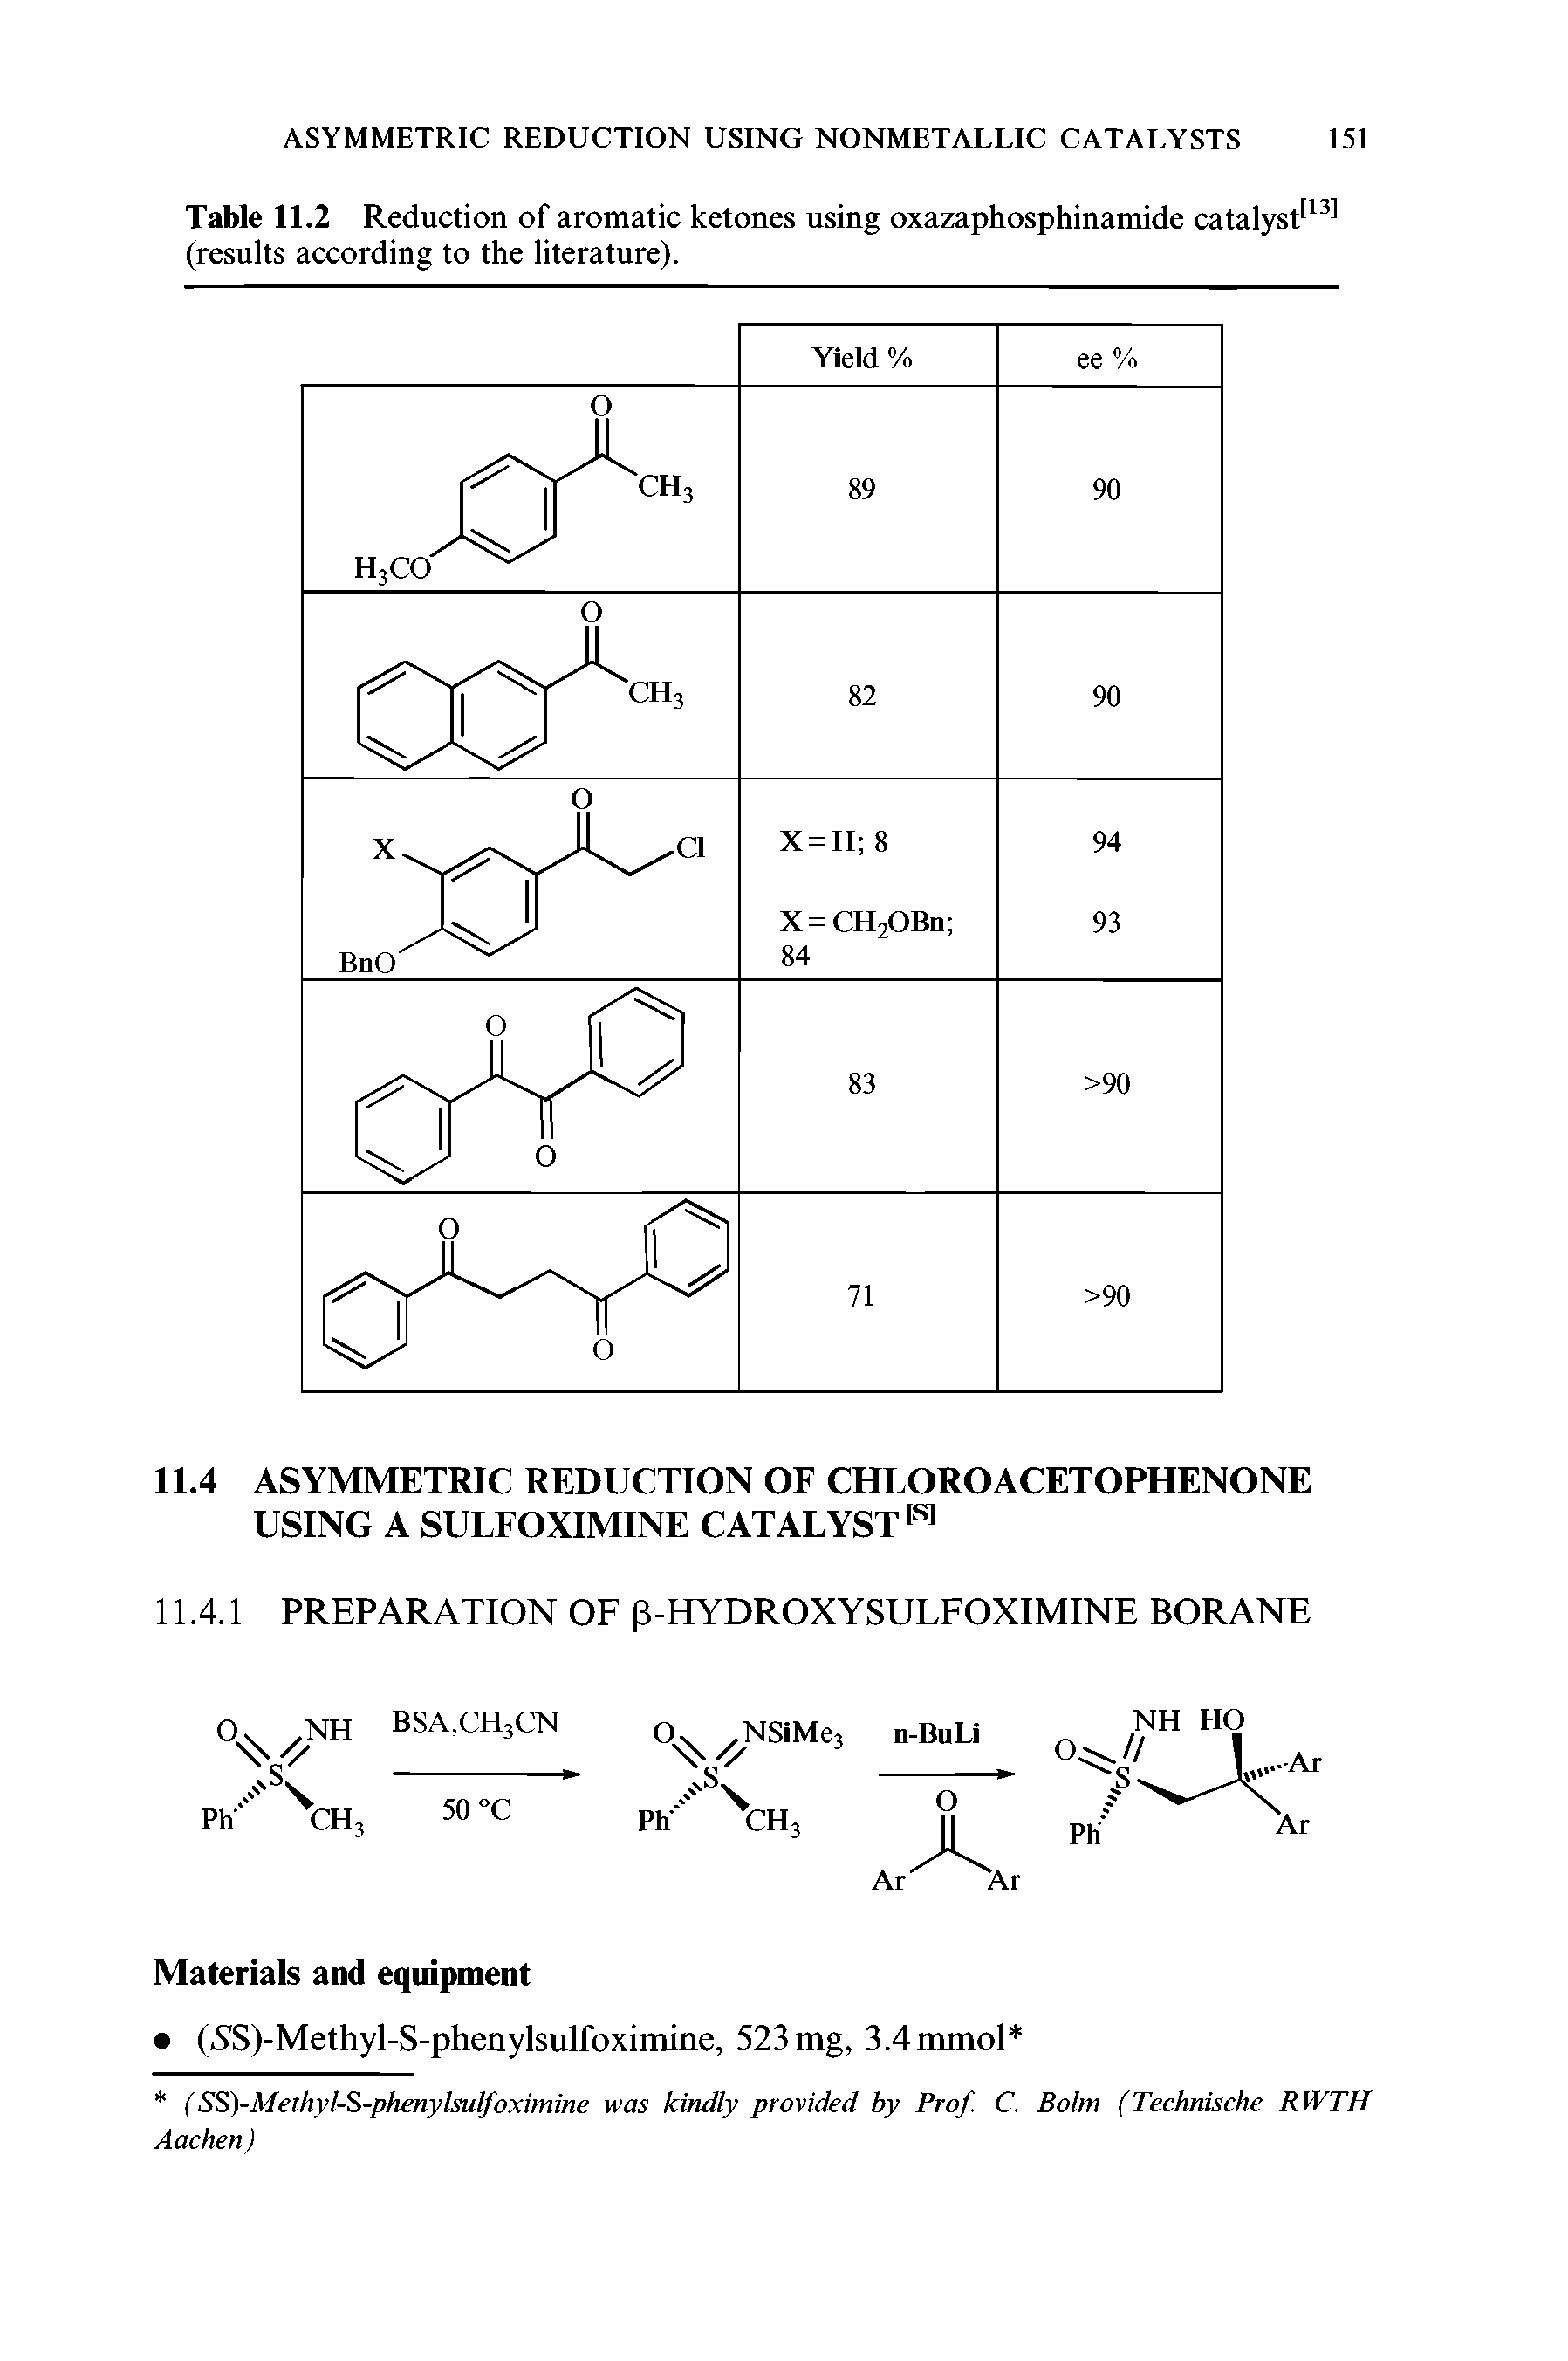 Table 11.2 Reduction of aromatic ketones using oxazaphosphinamide catalyst1131 (results according to the literature).